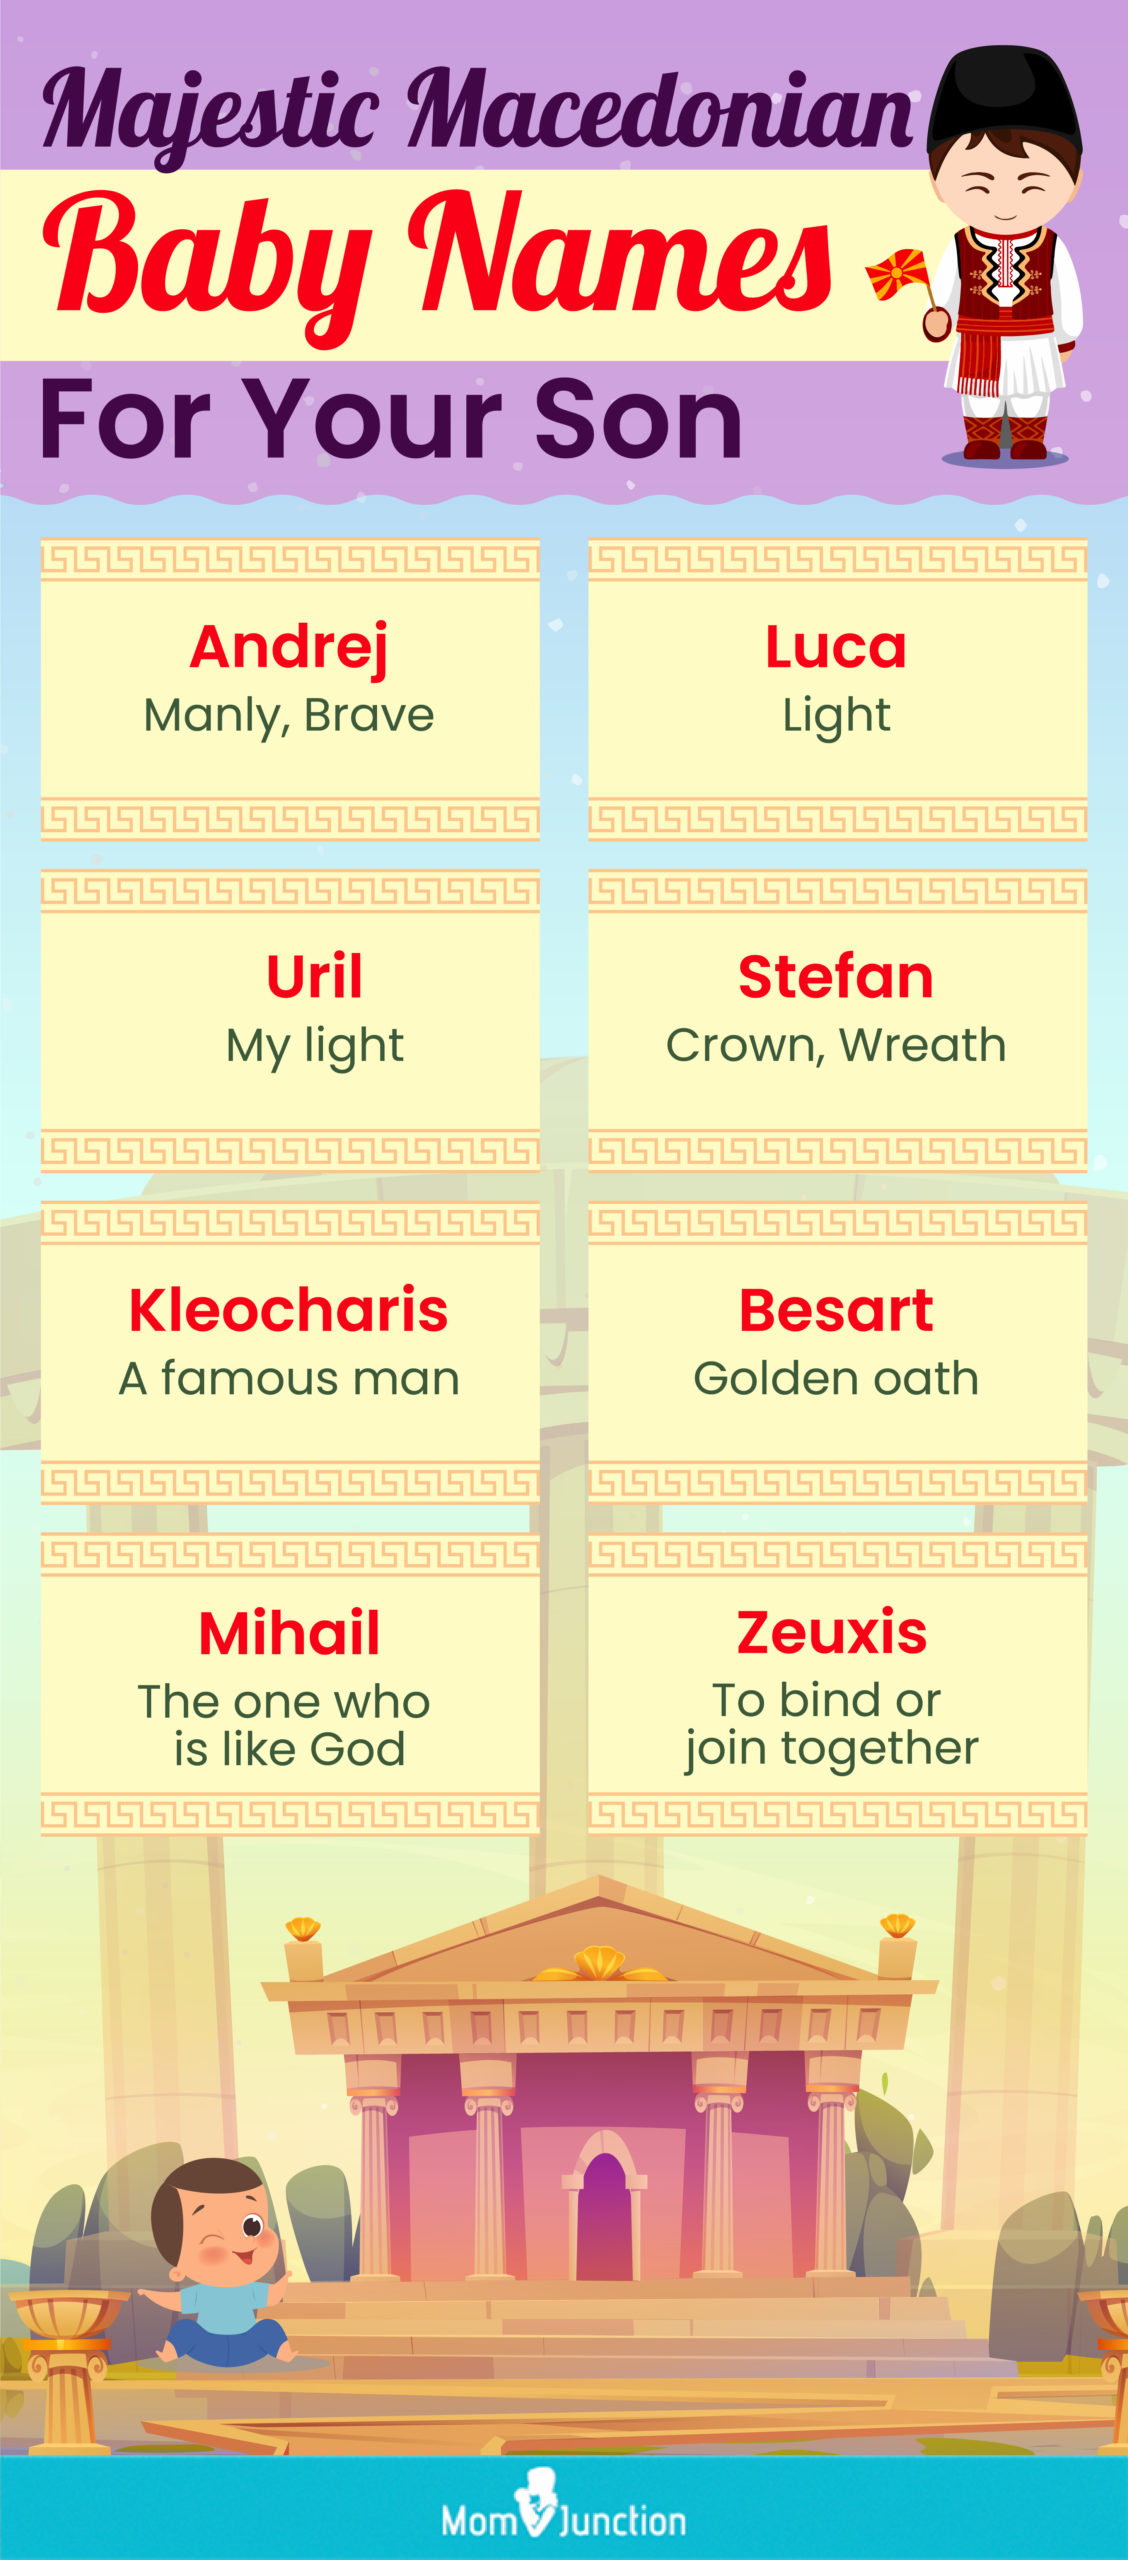 majestic macedonian baby names for your son (infographic)